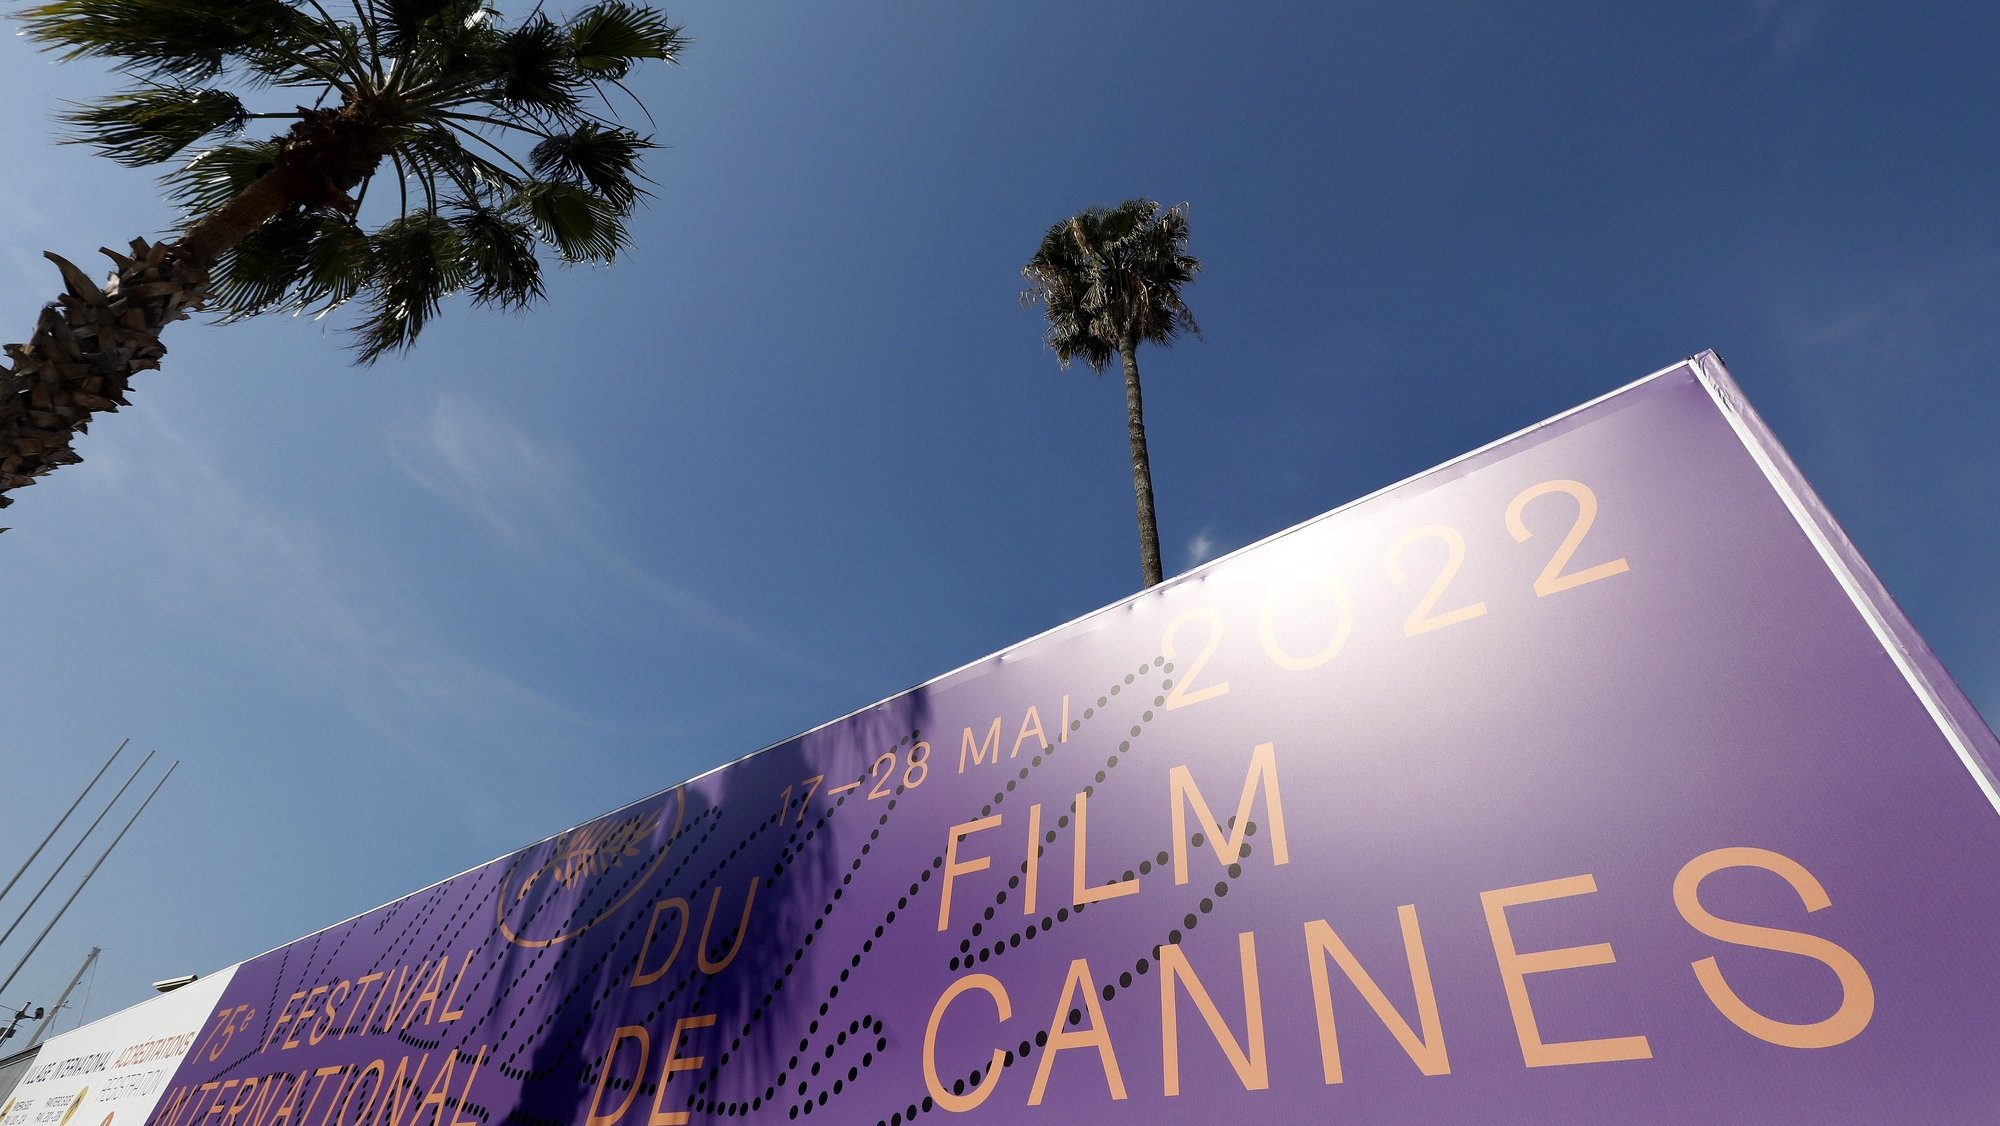 epa09948284 A view of a palm tree behind a giant canvas of the official poster of the 75th annual Cannes Film Festival on the Palais des Festivals facade in Cannes, France, 15 May 2022. The festival runs from 17 to 28 May.  EPA/SEBASTIEN NOGIER